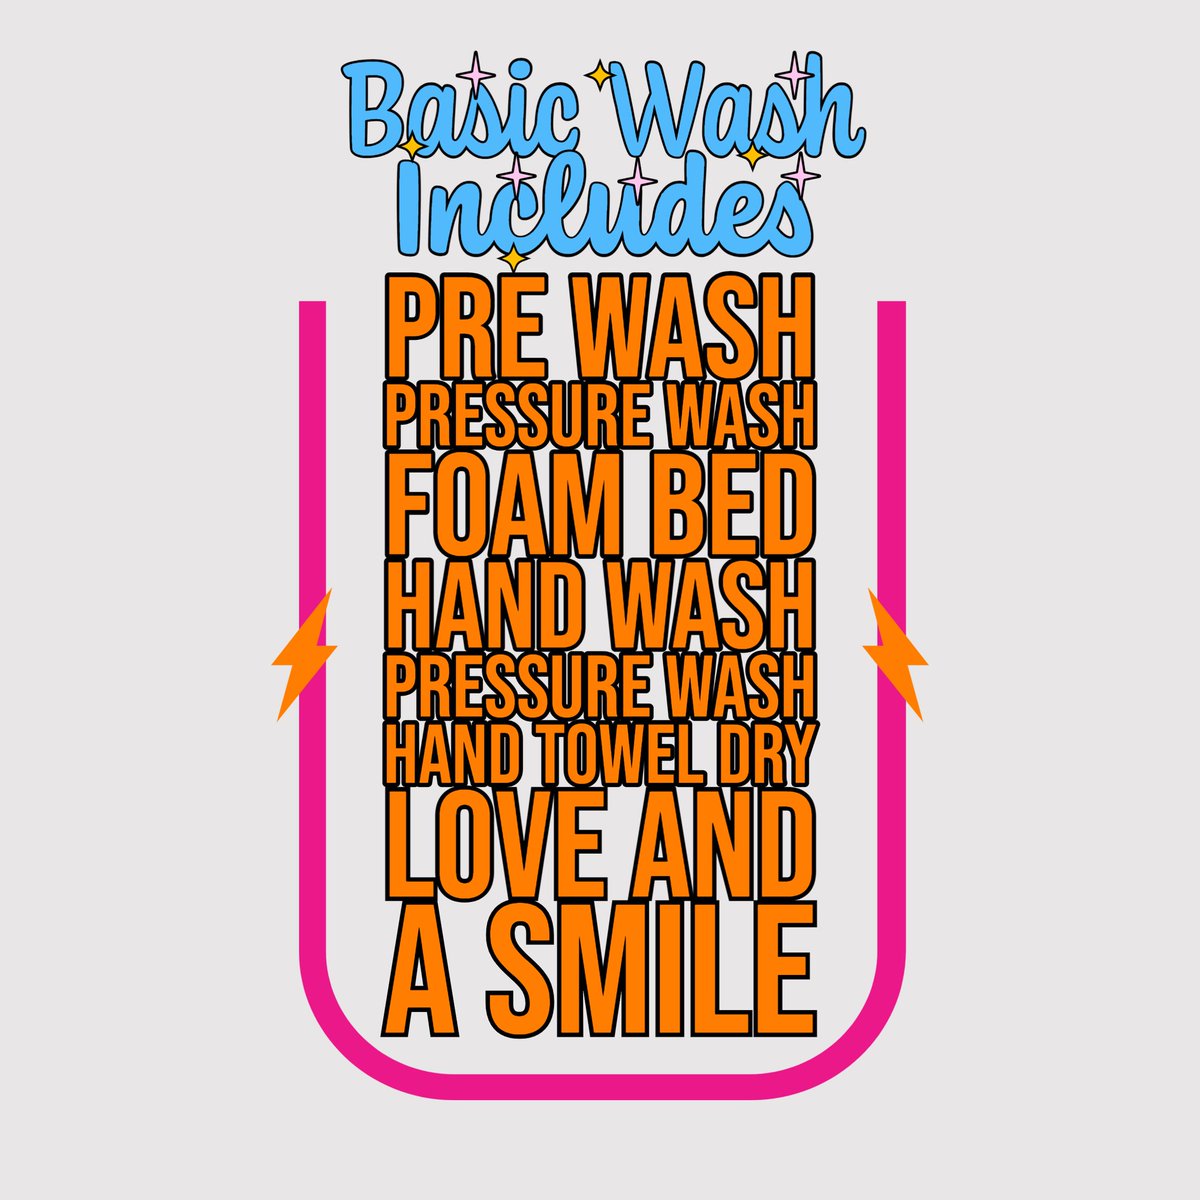 Get spring ready
Book your wash today 
Serving Mount Olive area in New Jersey 
.
.
.
#mobiledetail #mobilecarwash #mobilewash #mobile_detailer #wecometoyou #NewJersey #mountolive #tksmobilecarwash